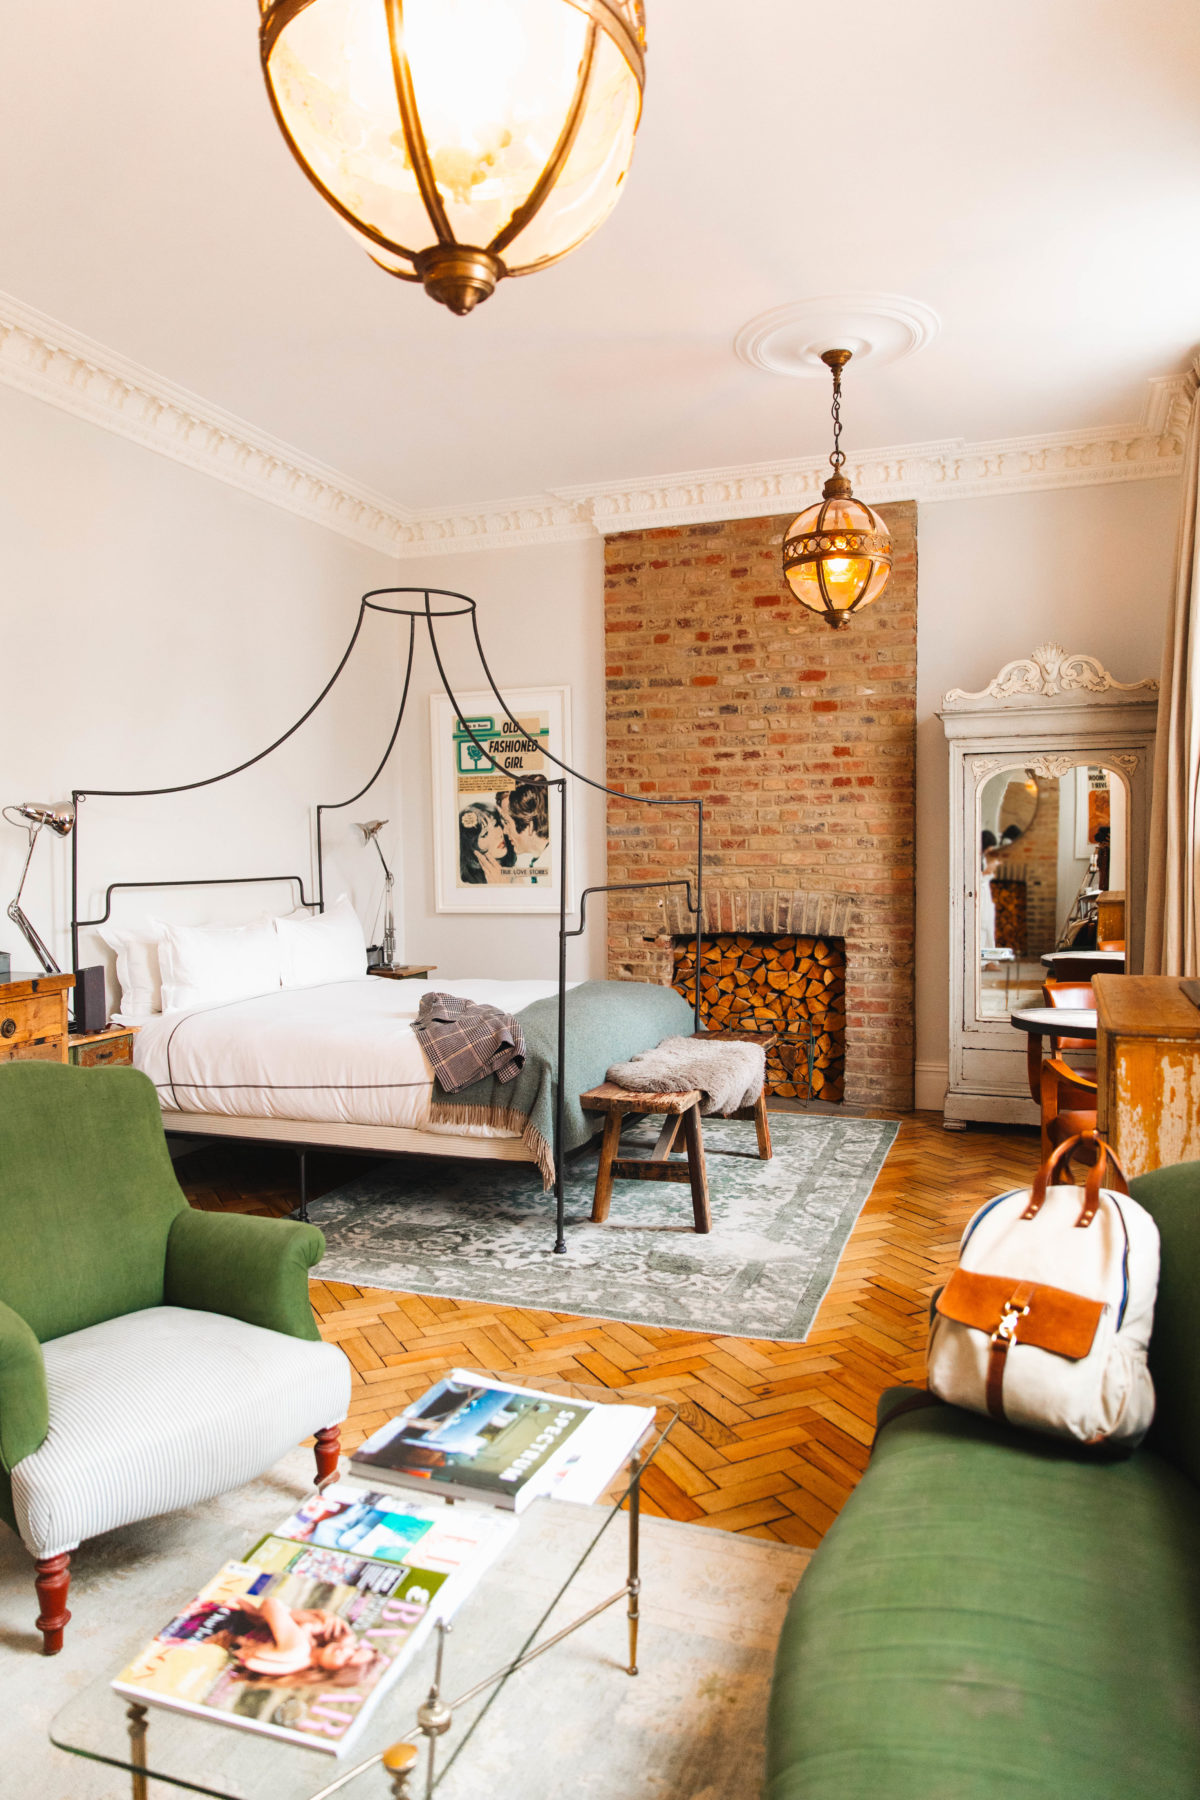 Where to Stay in London: Artist Residence Hotel